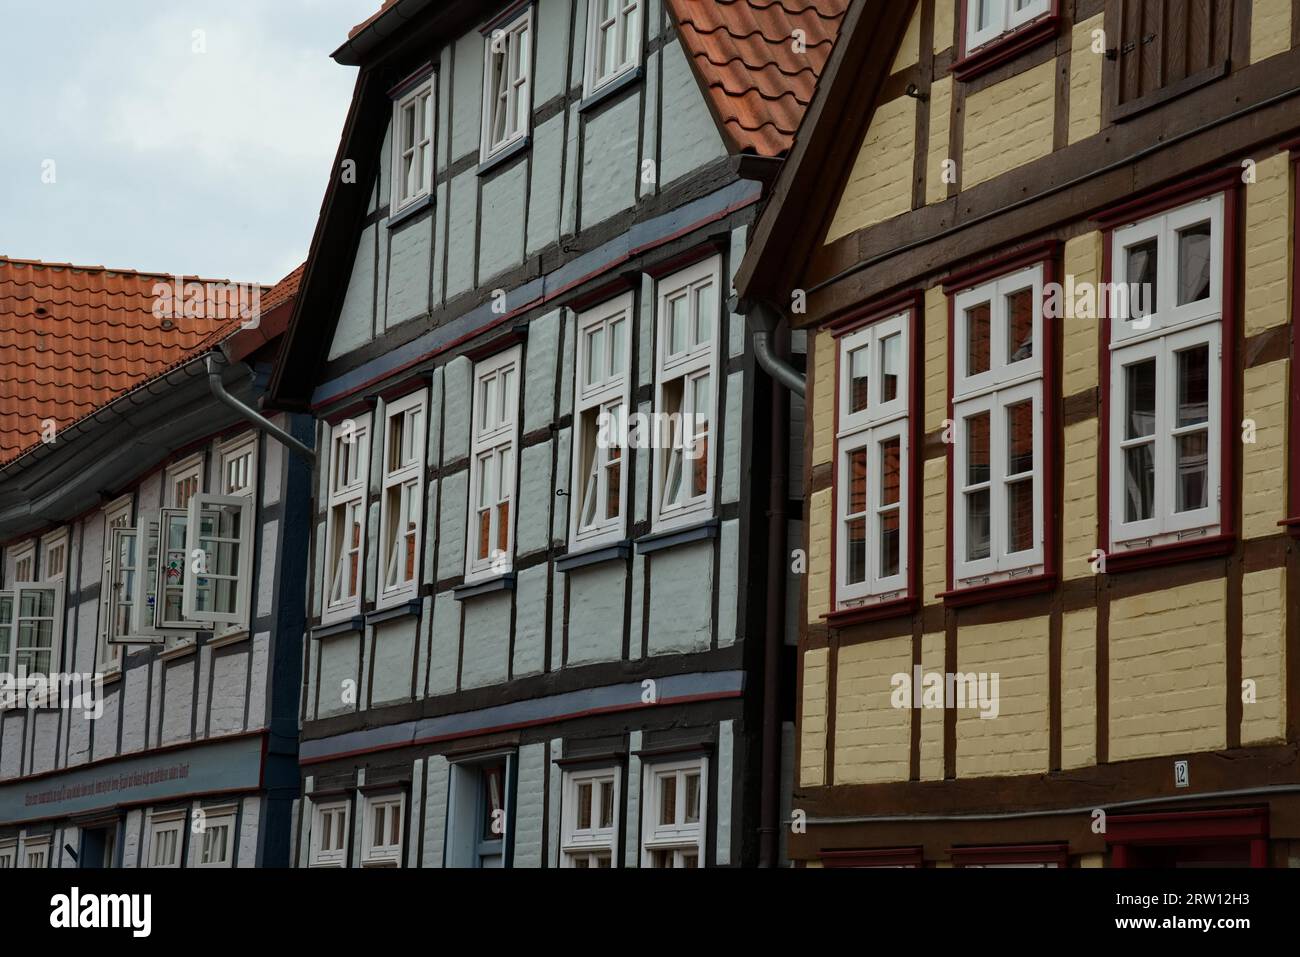 Facades of half-timbered houses in Hitzacker (Elbe), Luechow-Dannenberg district, Lower Saxony, Germany Stock Photo